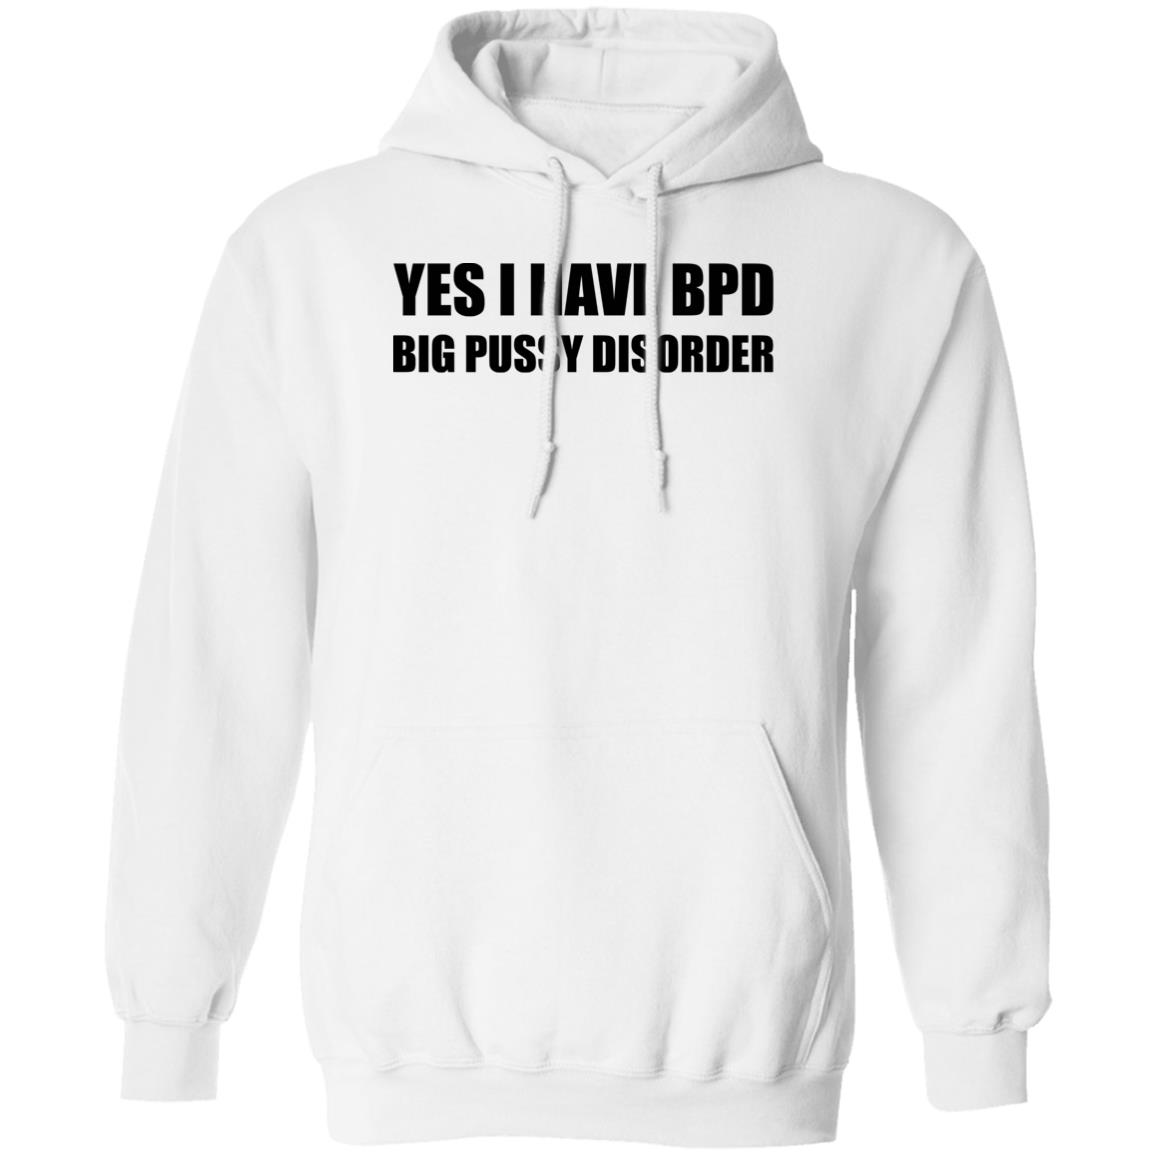 Yes I Have BPD Big Pussy Disorder Hoodie